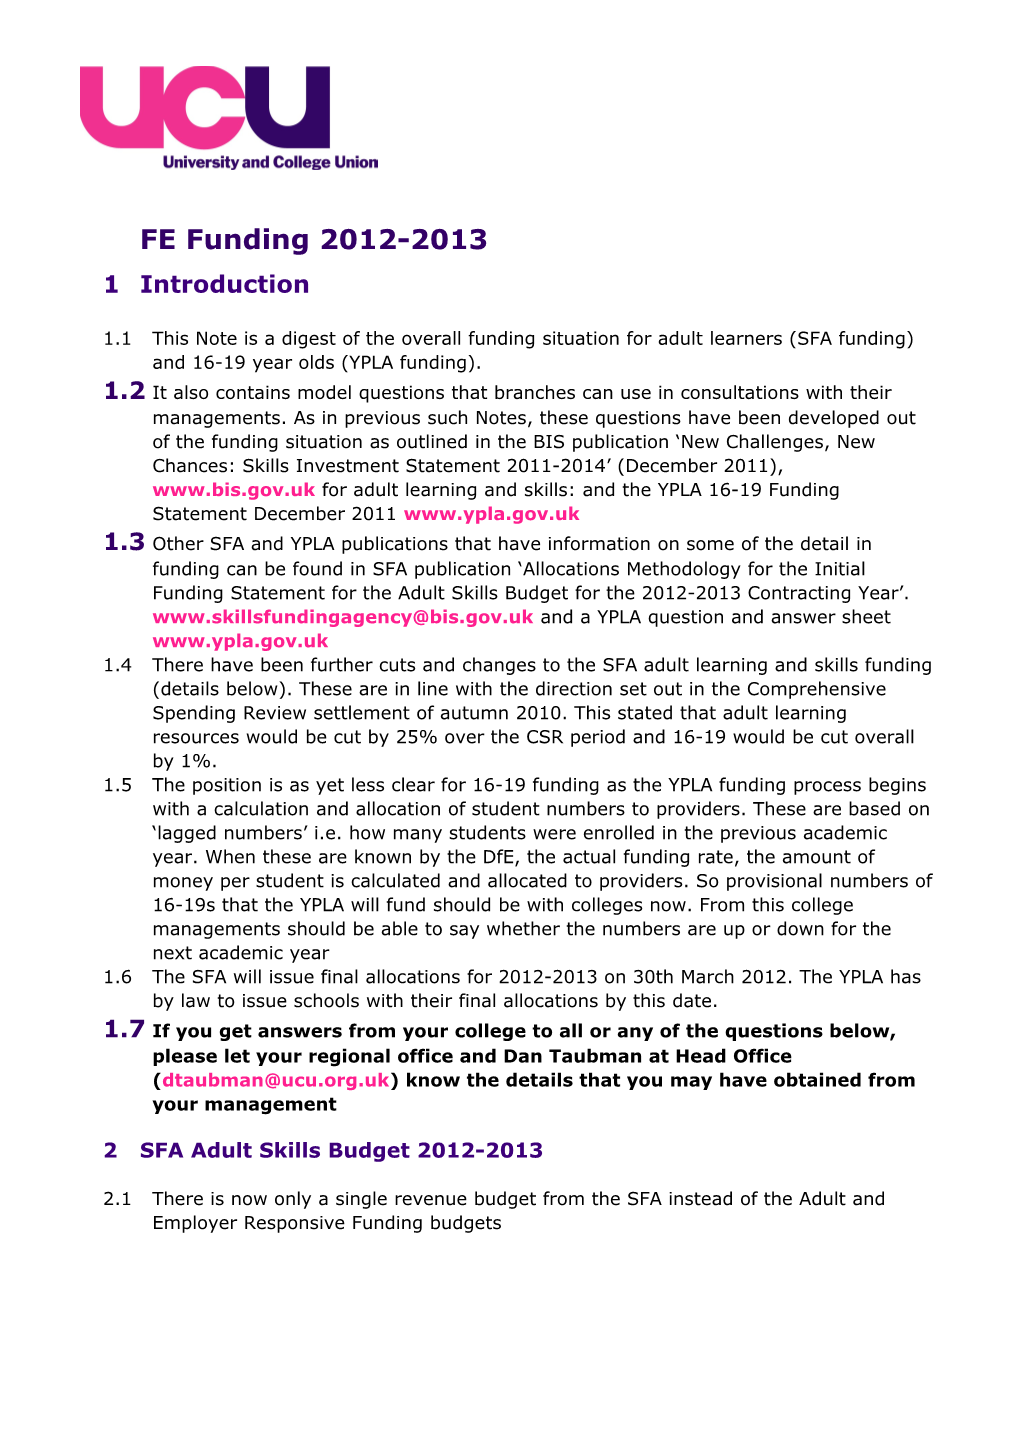 1.1This Note Is a Digest of the Overall Funding Situation for Adult Learners (SFA Funding)